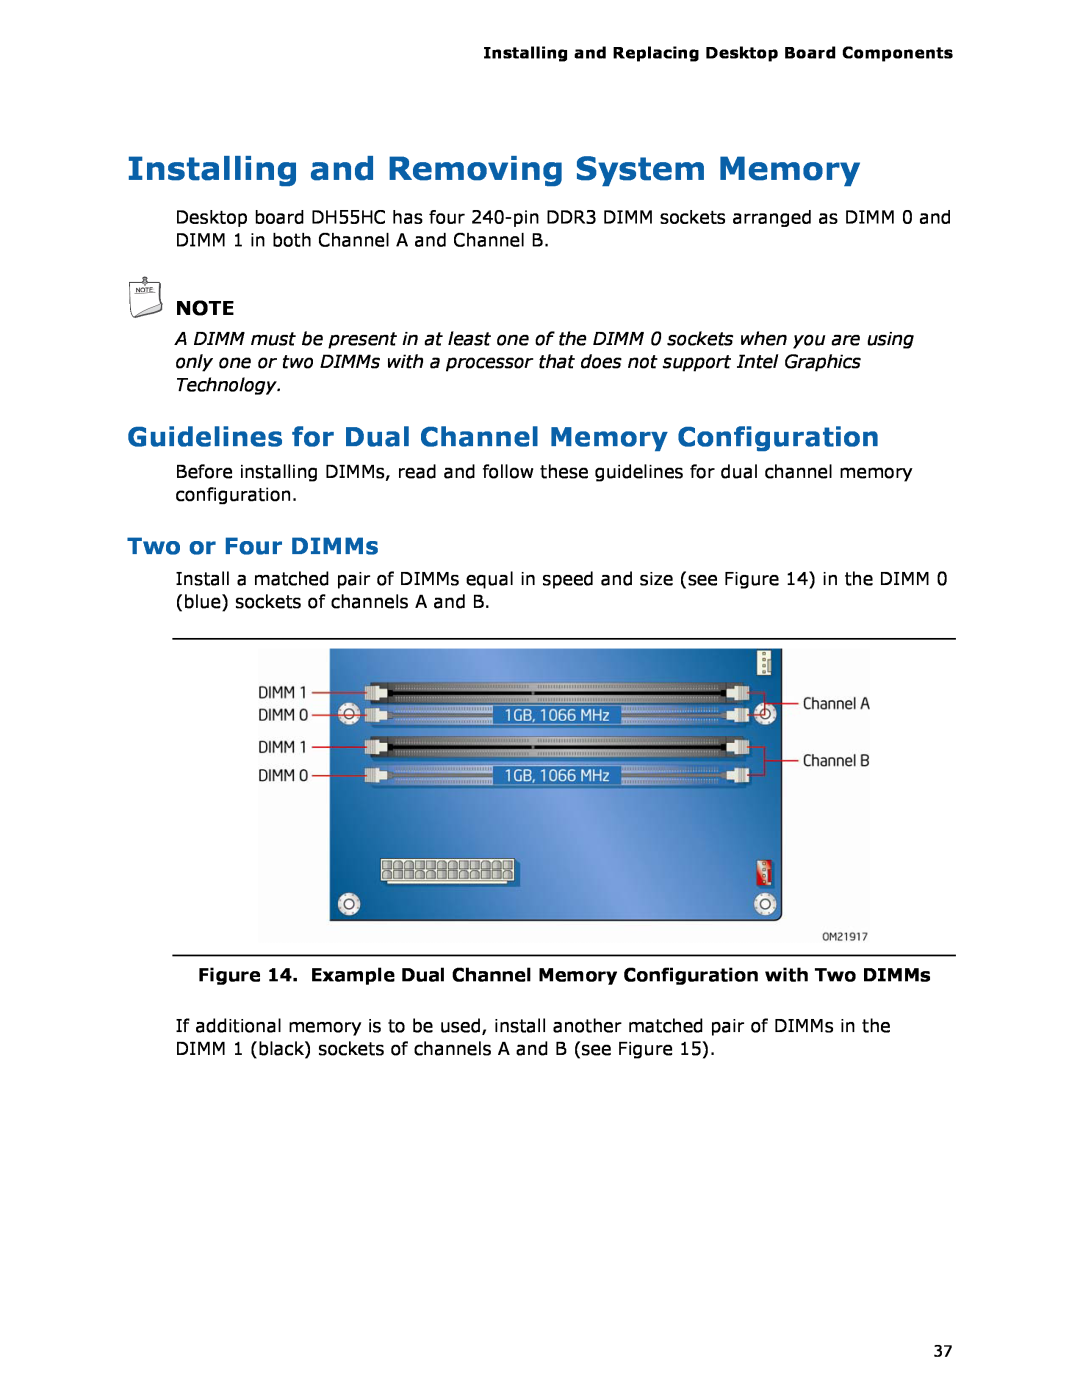 Intel BOXDH55HC Installing and Removing System Memory, Guidelines for Dual Channel Memory Configuration, Two or Four DIMMs 